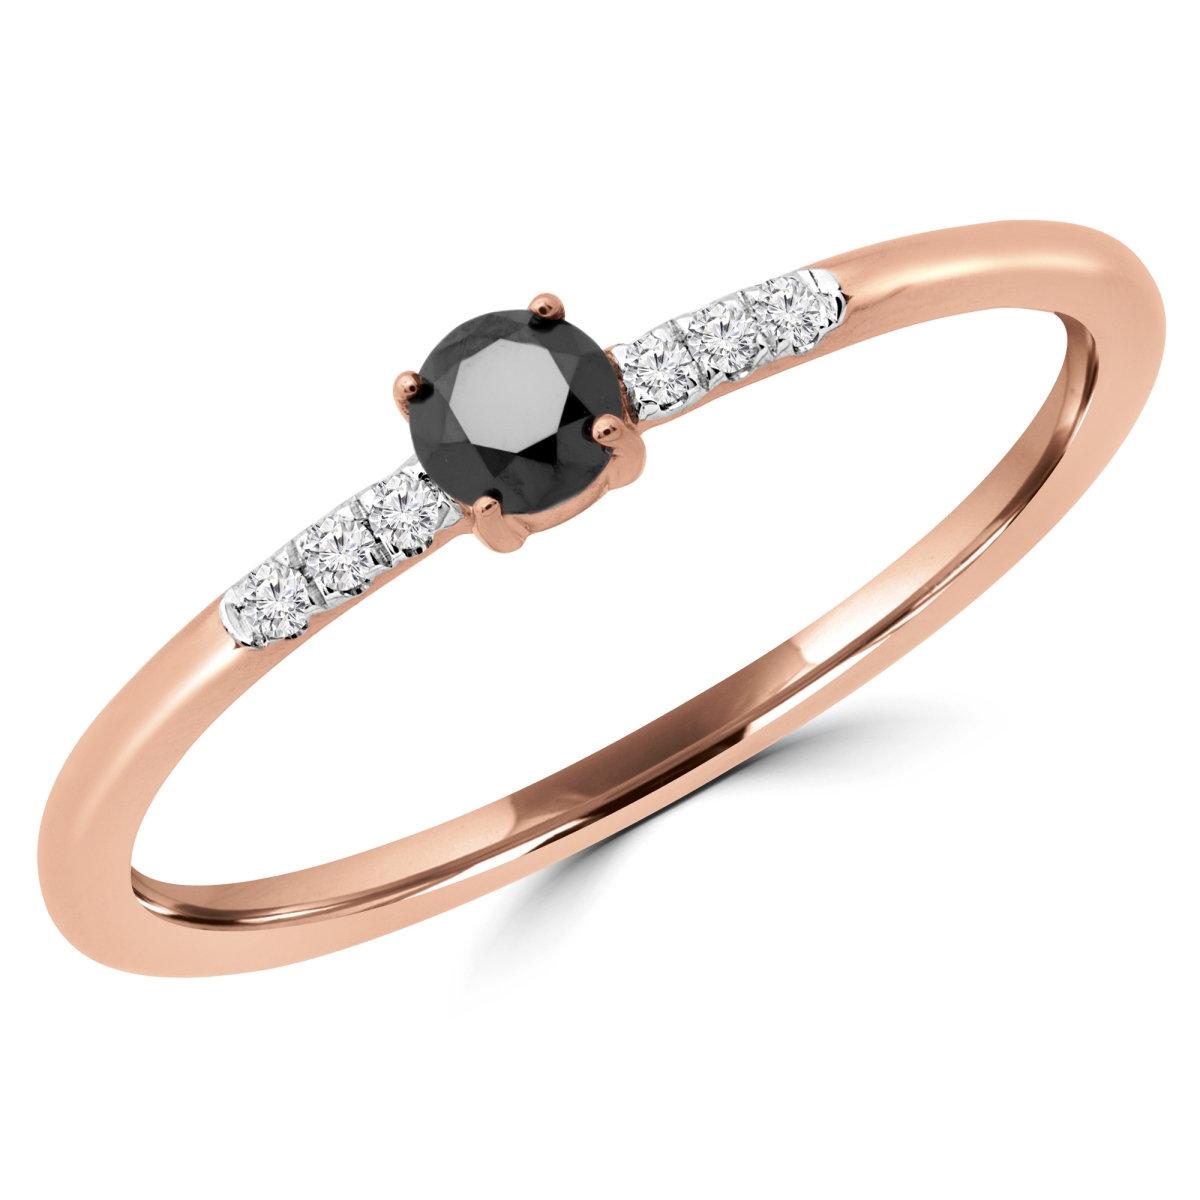 Picture of Majesty Diamonds MDR190079-6.5 0.16 CTW Round Black Diamond Bezel Set Cocktail Ring in 14K Rose Gold - Size 6.5